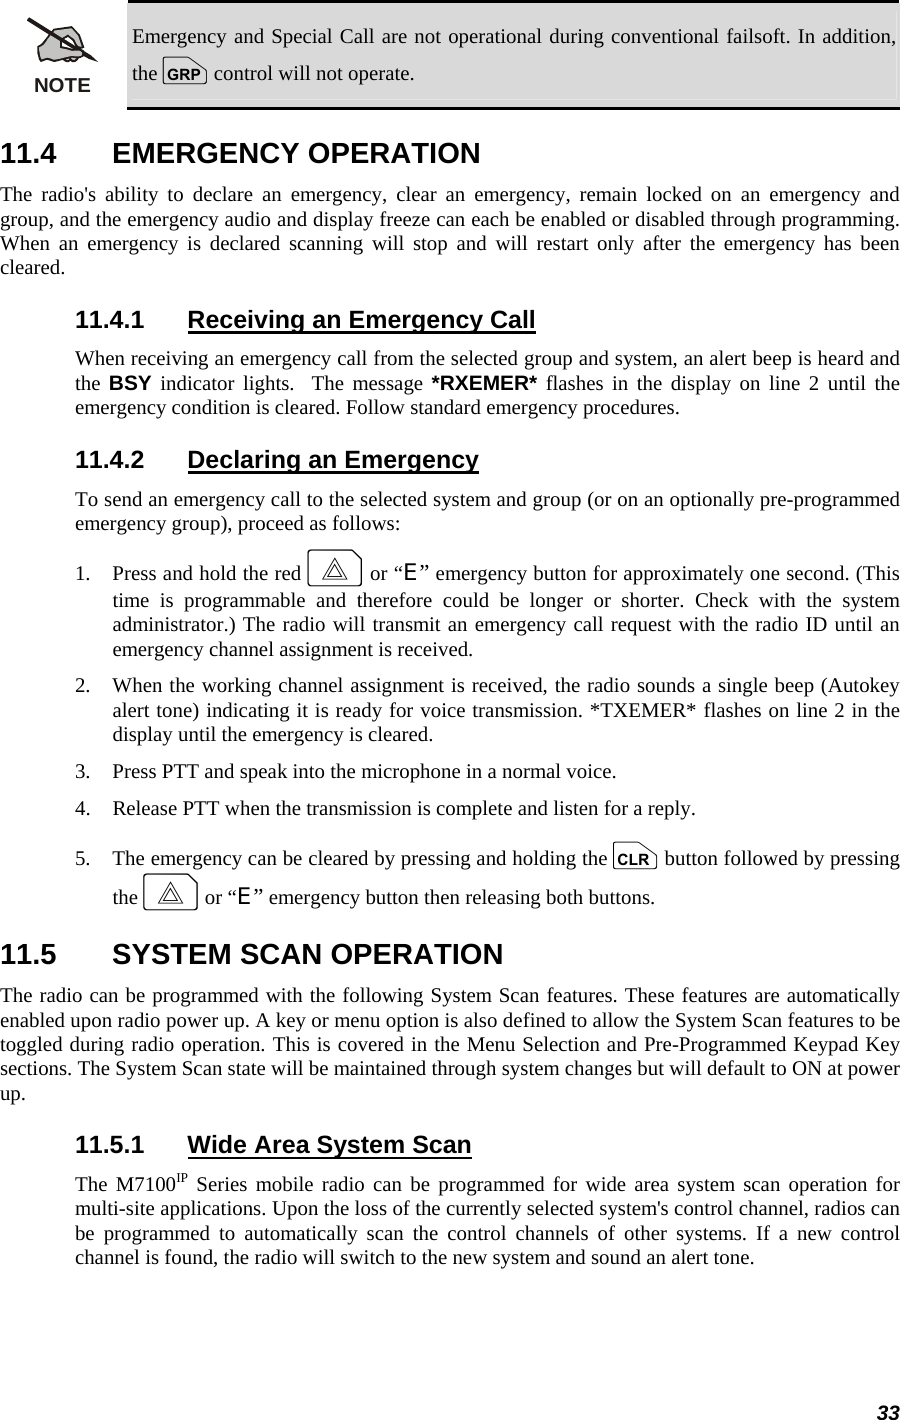 33 NOTE Emergency and Special Call are not operational during conventional failsoft. In addition, the g control will not operate. 11.4 EMERGENCY OPERATION The radio&apos;s ability to declare an emergency, clear an emergency, remain locked on an emergency and group, and the emergency audio and display freeze can each be enabled or disabled through programming. When an emergency is declared scanning will stop and will restart only after the emergency has been cleared. 11.4.1  Receiving an Emergency Call When receiving an emergency call from the selected group and system, an alert beep is heard and the  BSY indicator lights.  The message *RXEMER* flashes in the display on line 2 until the emergency condition is cleared. Follow standard emergency procedures. 11.4.2  Declaring an Emergency To send an emergency call to the selected system and group (or on an optionally pre-programmed emergency group), proceed as follows: 1.   Press and hold the red E or “E” emergency button for approximately one second. (This time is programmable and therefore could be longer or shorter. Check with the system administrator.) The radio will transmit an emergency call request with the radio ID until an emergency channel assignment is received. 2.   When the working channel assignment is received, the radio sounds a single beep (Autokey alert tone) indicating it is ready for voice transmission. *TXEMER* flashes on line 2 in the display until the emergency is cleared. 3.   Press PTT and speak into the microphone in a normal voice. 4.   Release PTT when the transmission is complete and listen for a reply. 5.   The emergency can be cleared by pressing and holding the c button followed by pressing the E or “E” emergency button then releasing both buttons. 11.5  SYSTEM SCAN OPERATION The radio can be programmed with the following System Scan features. These features are automatically enabled upon radio power up. A key or menu option is also defined to allow the System Scan features to be toggled during radio operation. This is covered in the Menu Selection and Pre-Programmed Keypad Key sections. The System Scan state will be maintained through system changes but will default to ON at power up. 11.5.1  Wide Area System Scan The M7100IP Series mobile radio can be programmed for wide area system scan operation for multi-site applications. Upon the loss of the currently selected system&apos;s control channel, radios can be programmed to automatically scan the control channels of other systems. If a new control channel is found, the radio will switch to the new system and sound an alert tone. 